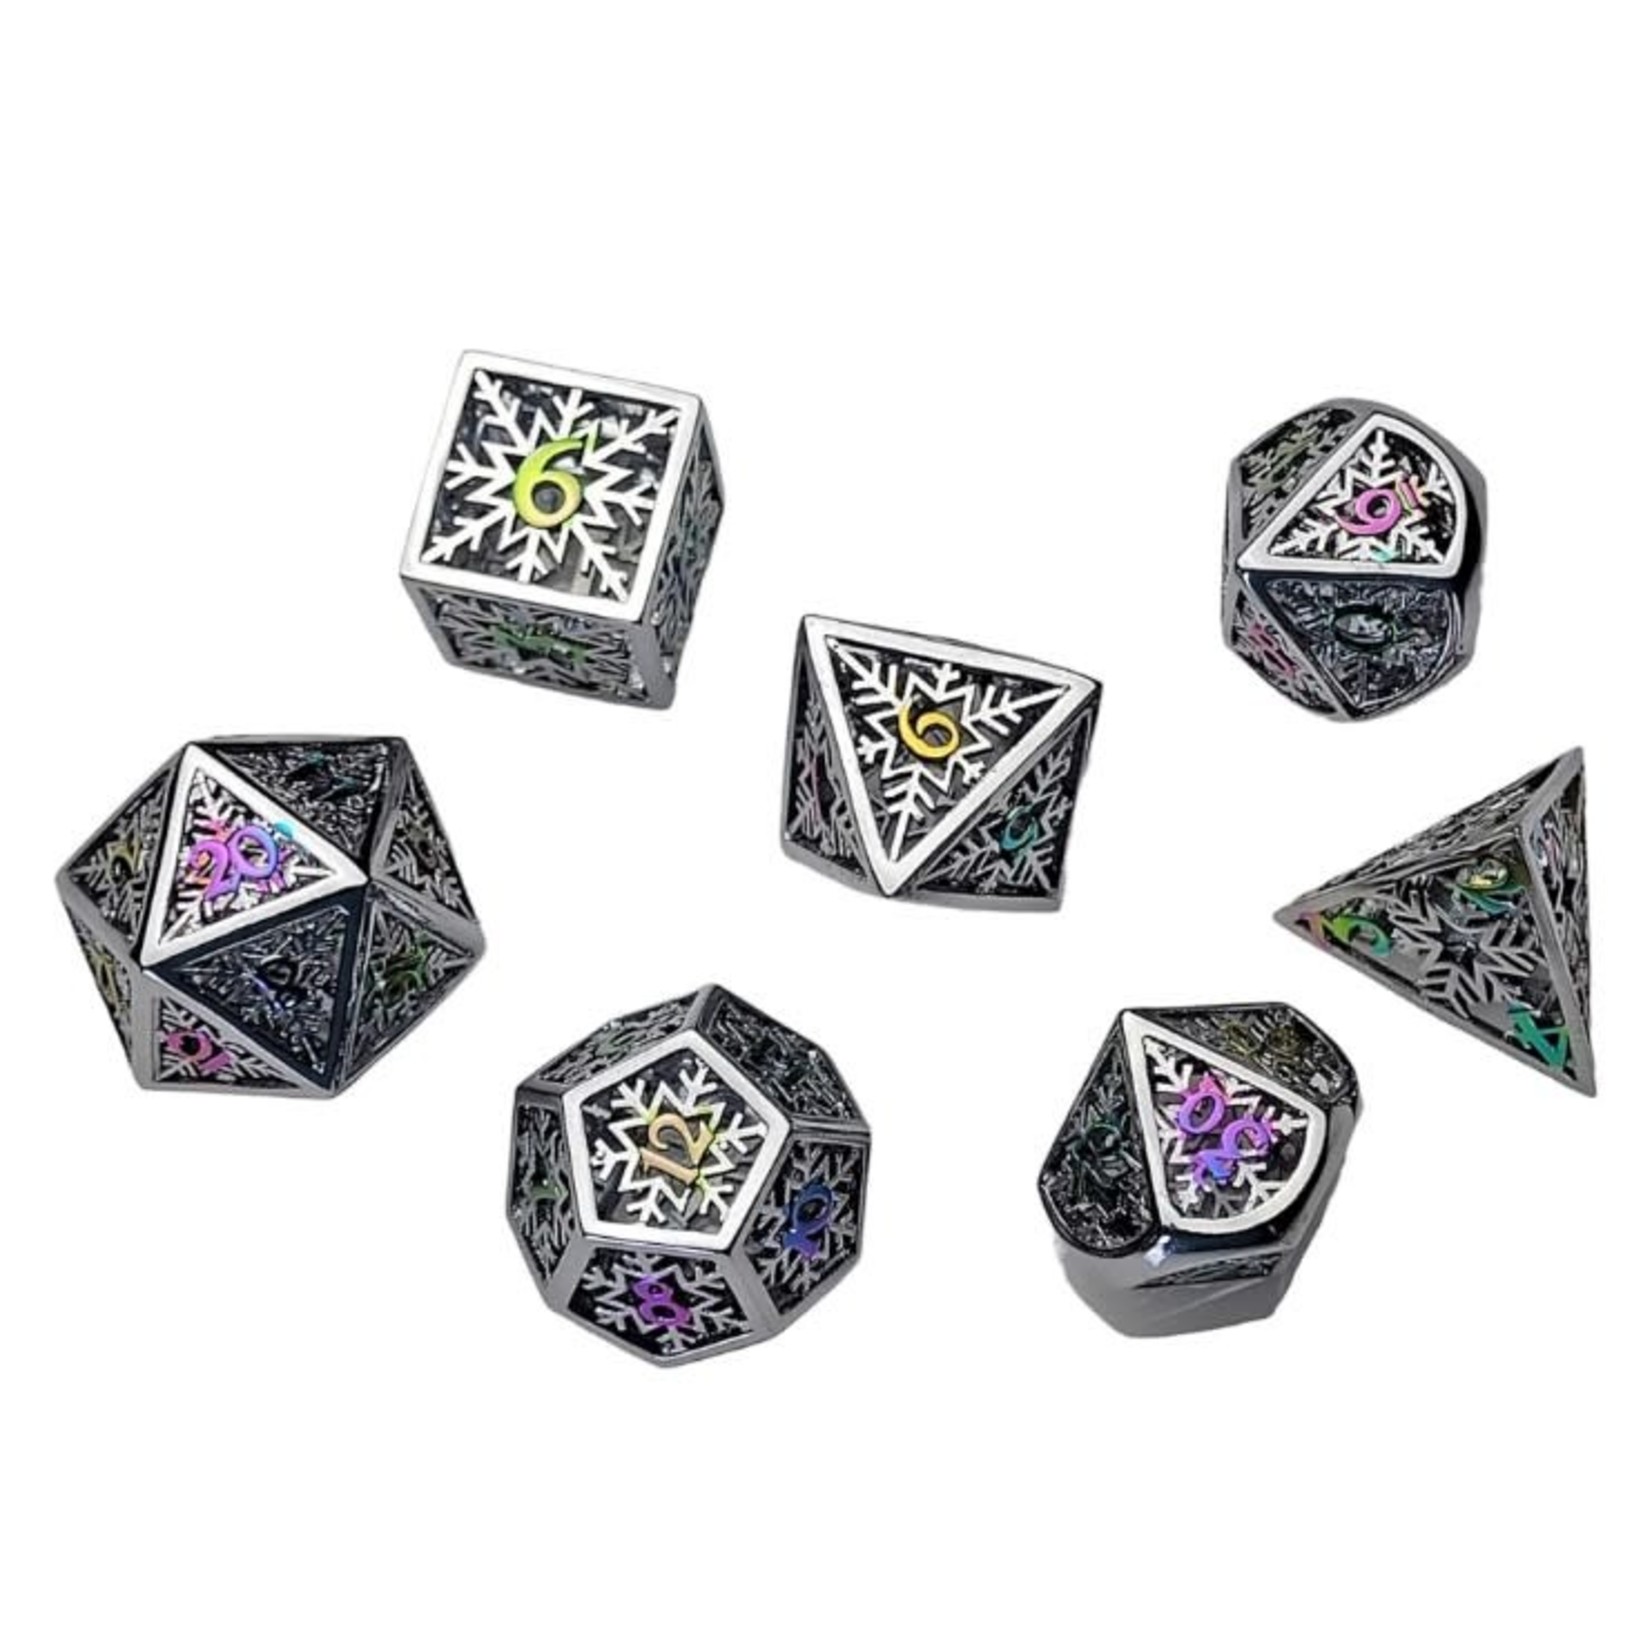 Forged Gaming Set of 7 Hollow Metal Dice: Prismatic Rime